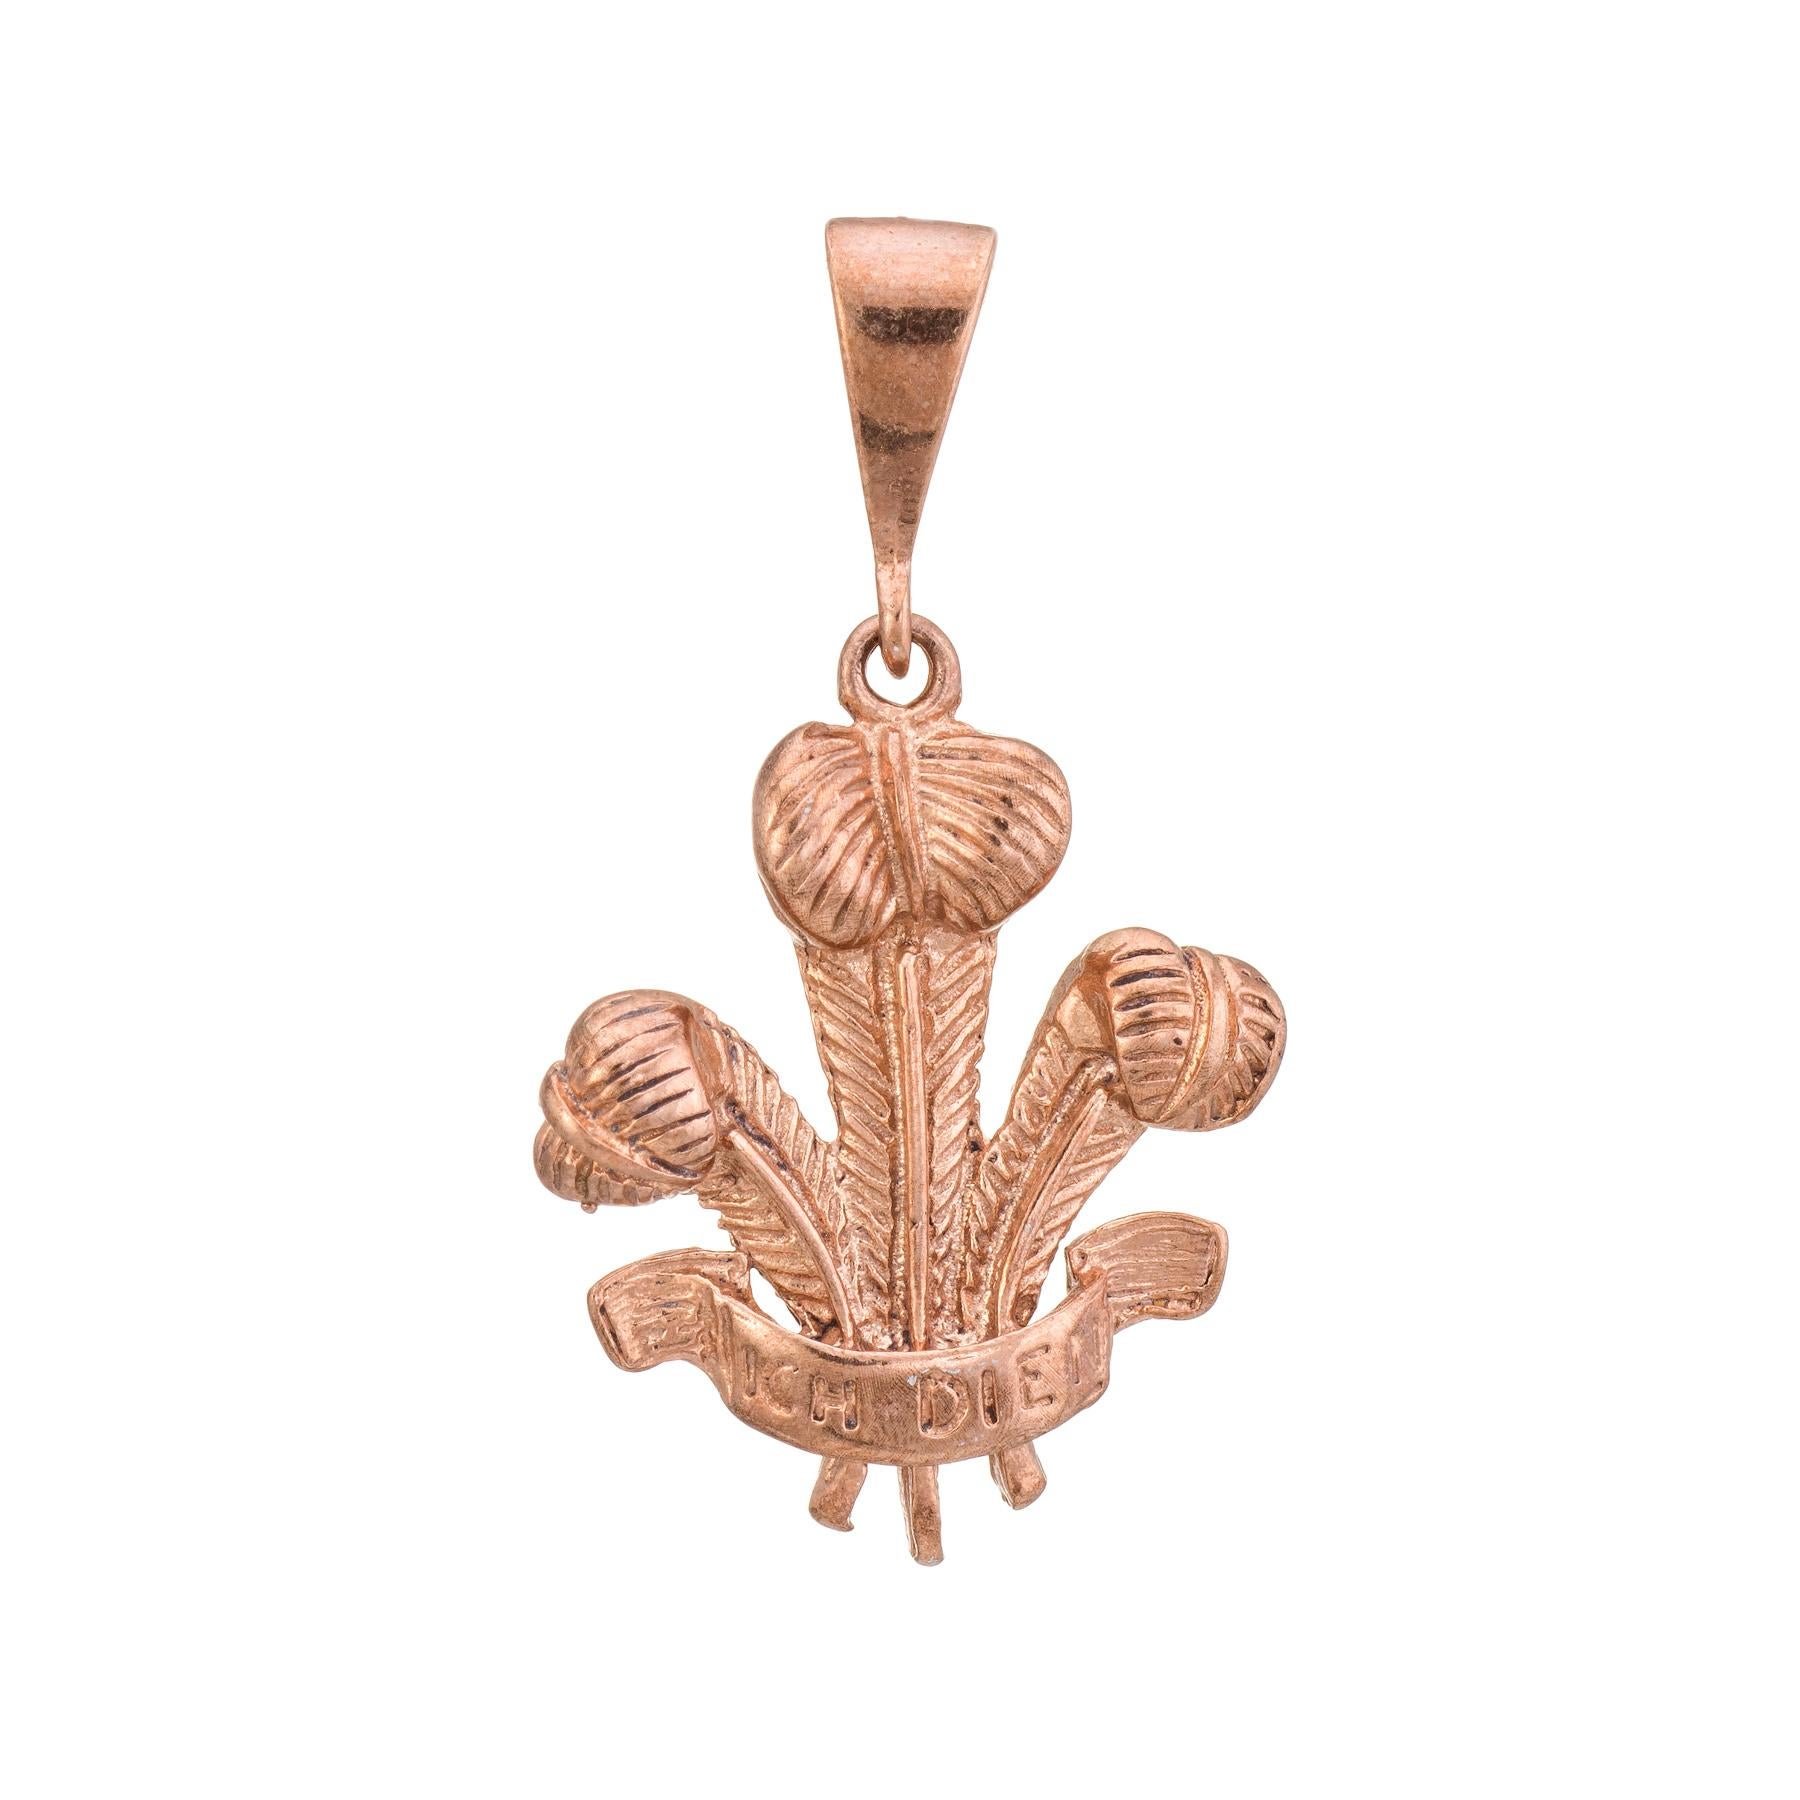 prince of wales pendant